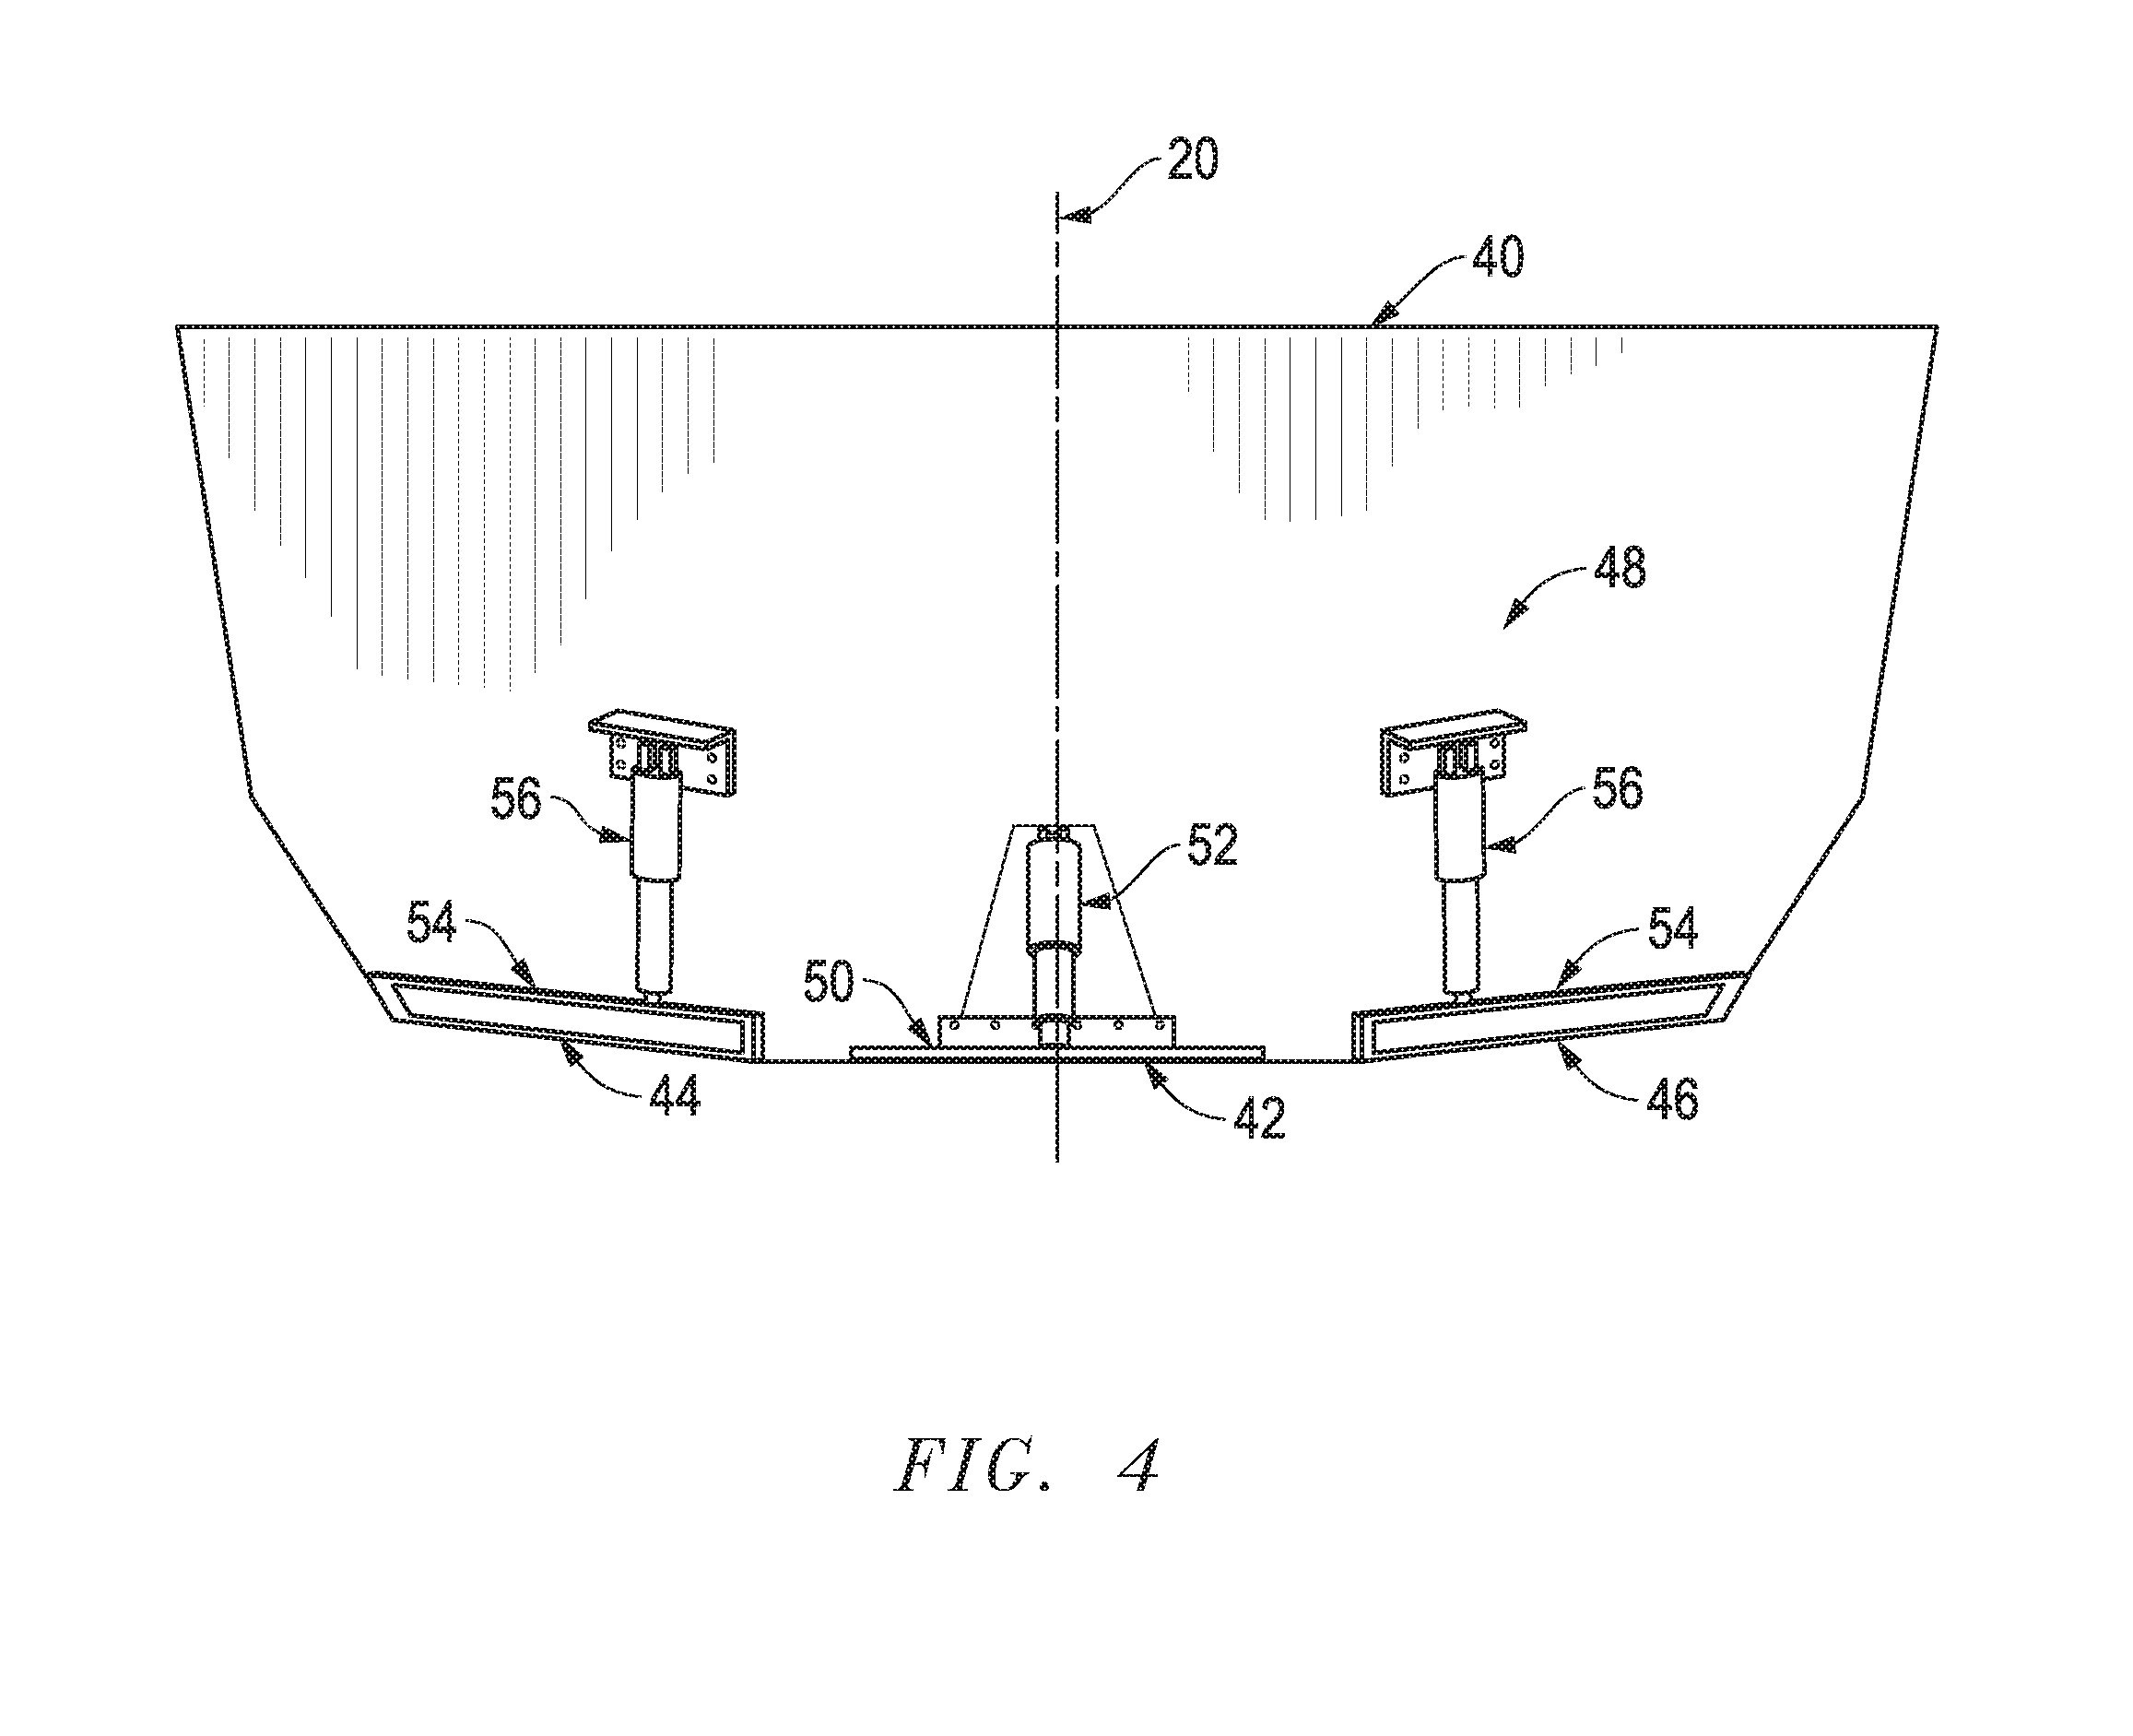 Boat and improved wake-modifying device for manipulating the size and shape of the wake